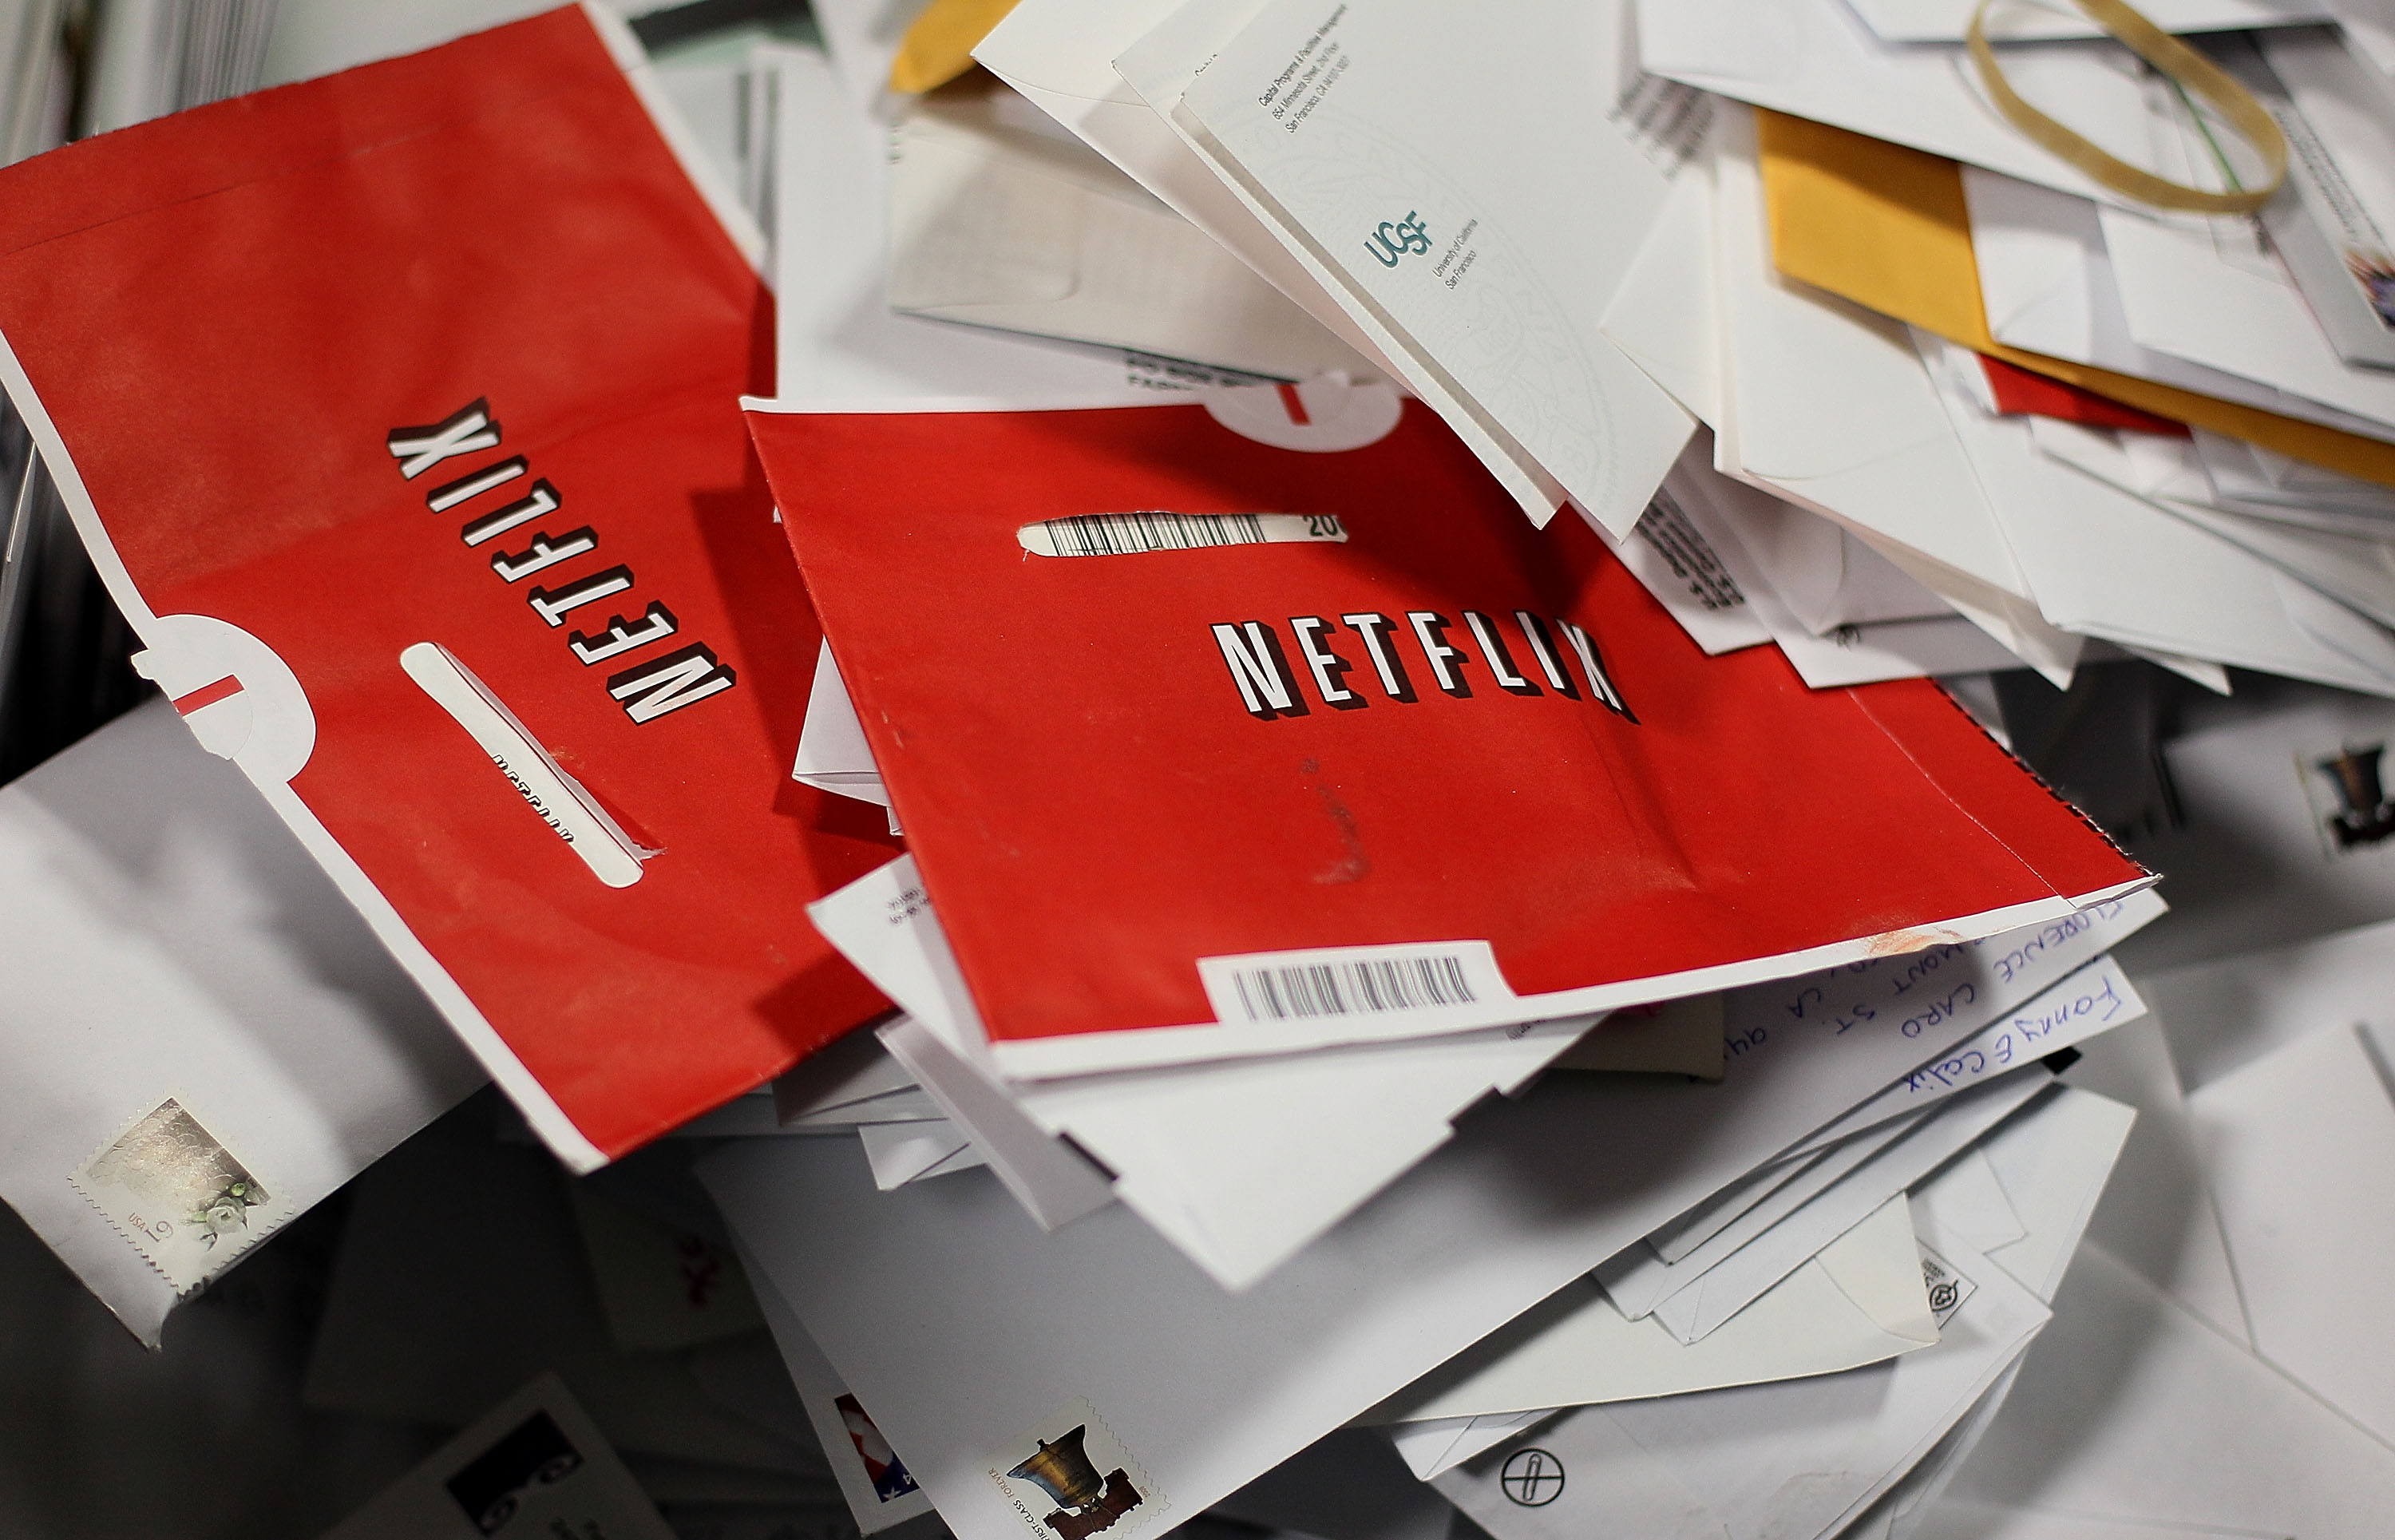 Netflix envelopes in a pile of mail